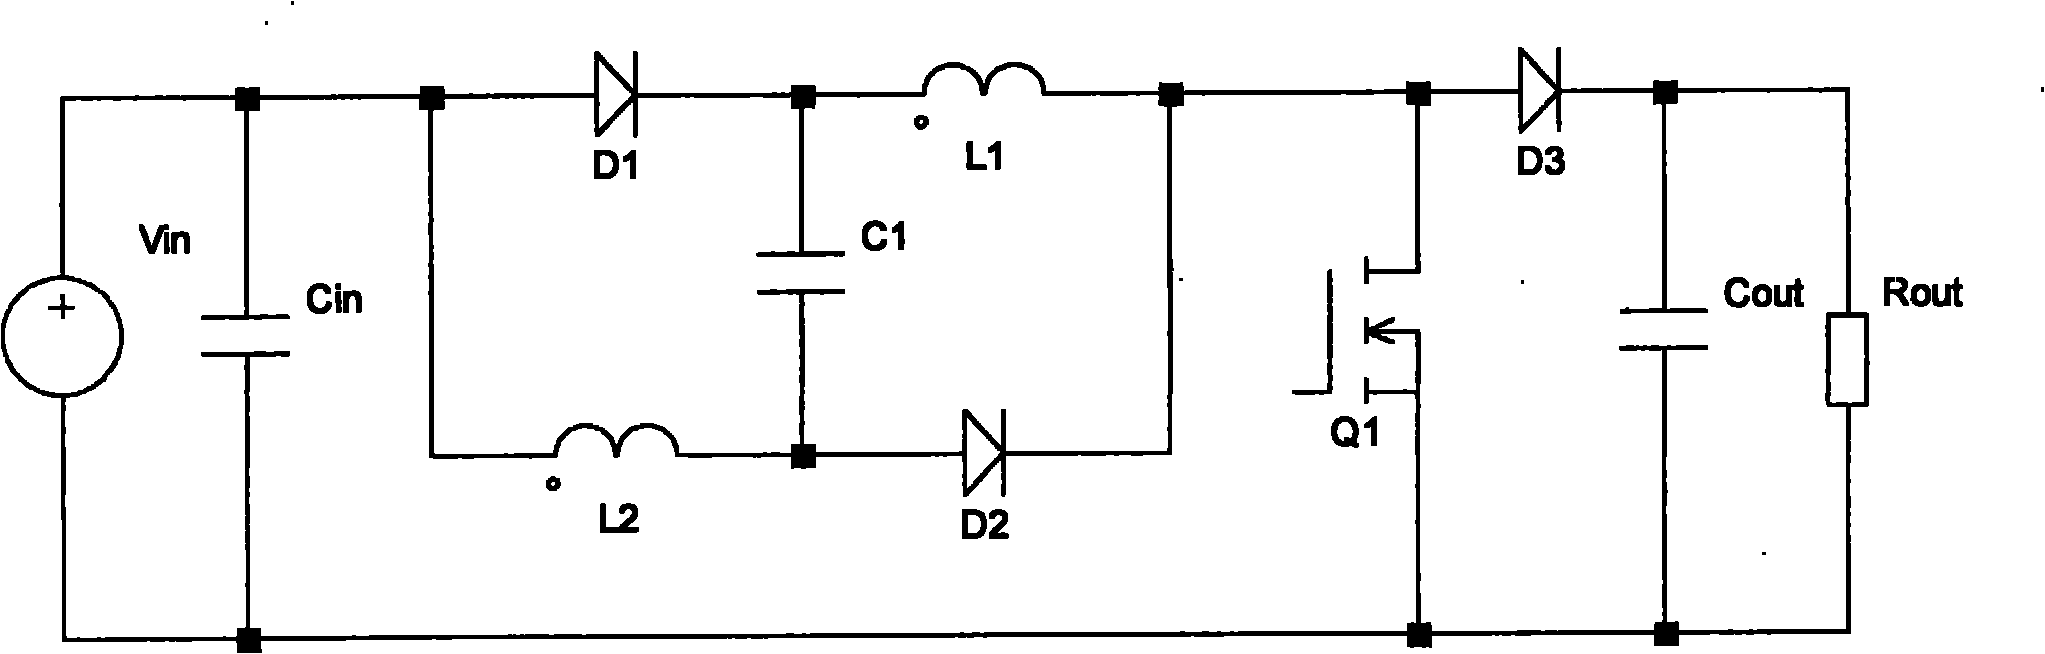 High-gain boost converter with inductance-capacitance switching network